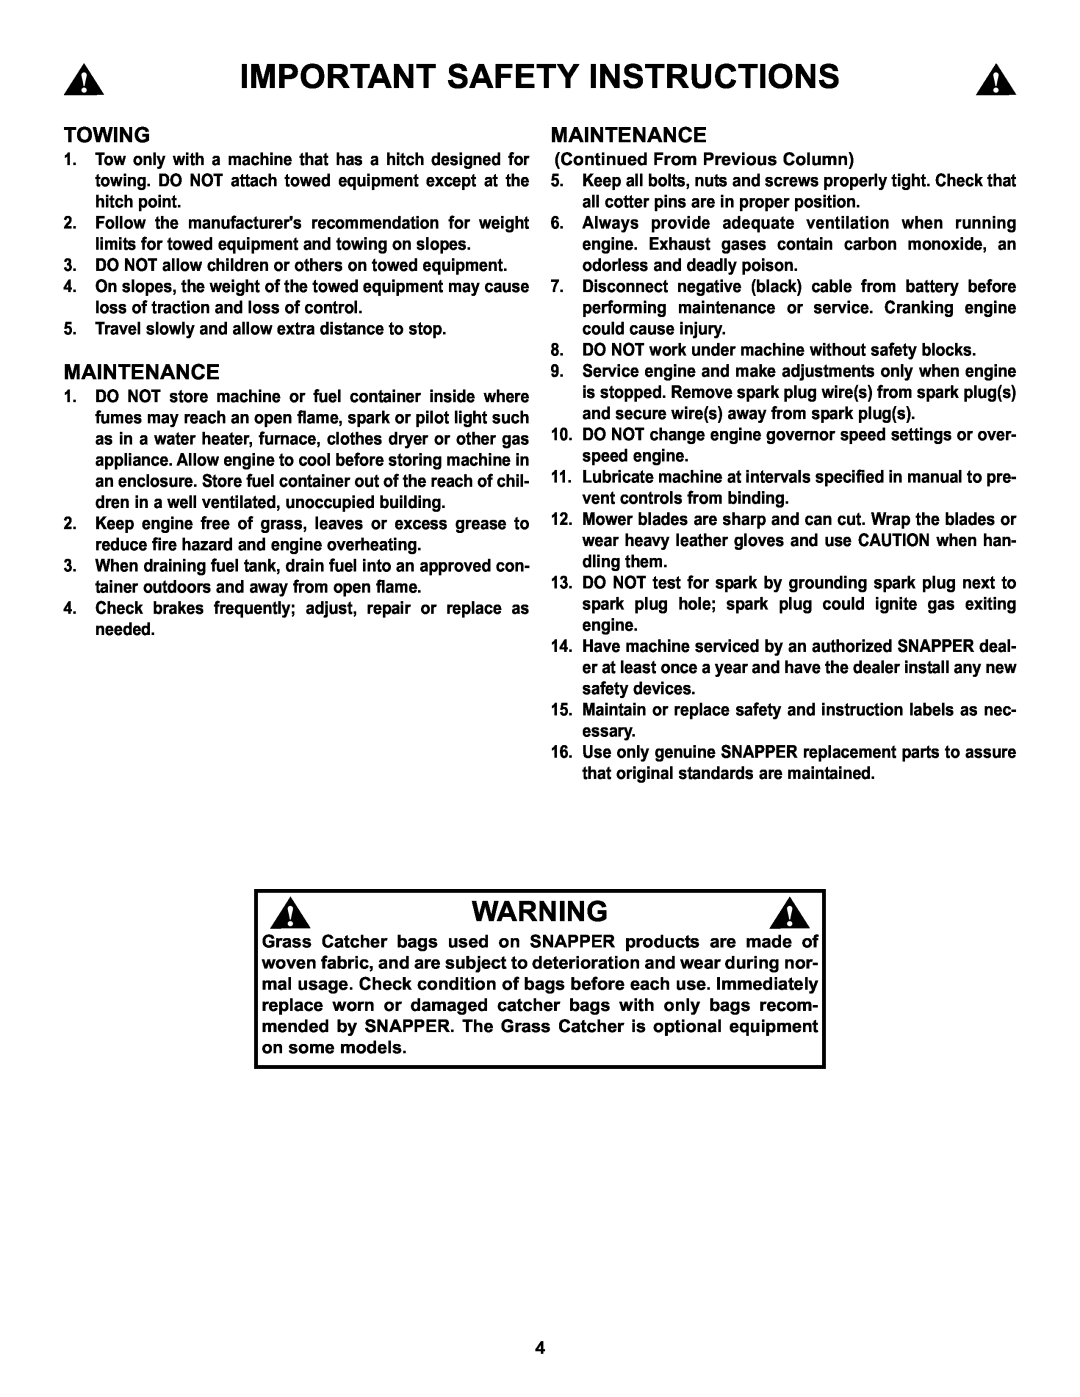 Snapper HZT21481BV important safety instructions Important Safety Instructions, Towing, Maintenance 